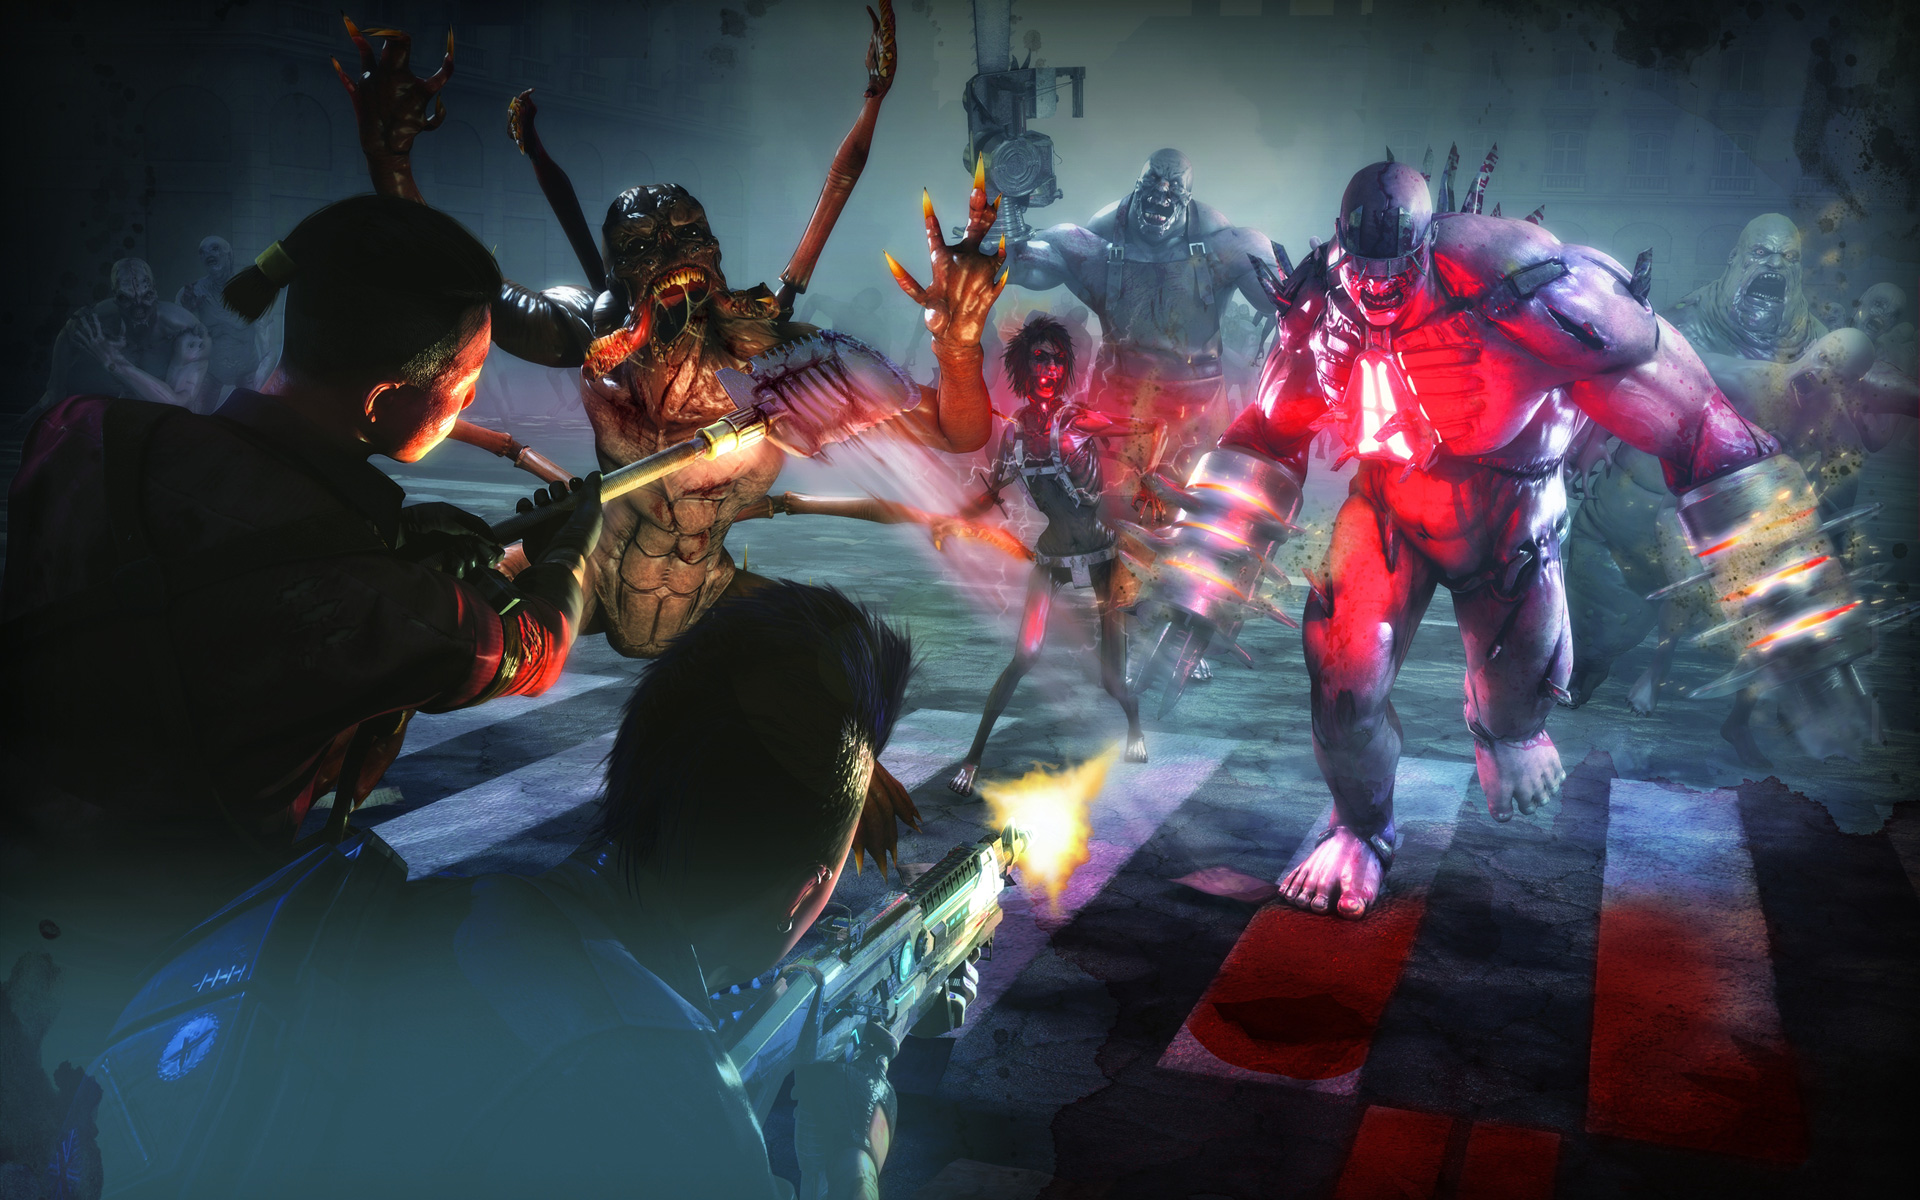 Killing Floor 2 Guide 10 Tips For Being A Better Zed Killer Pc Images, Photos, Reviews